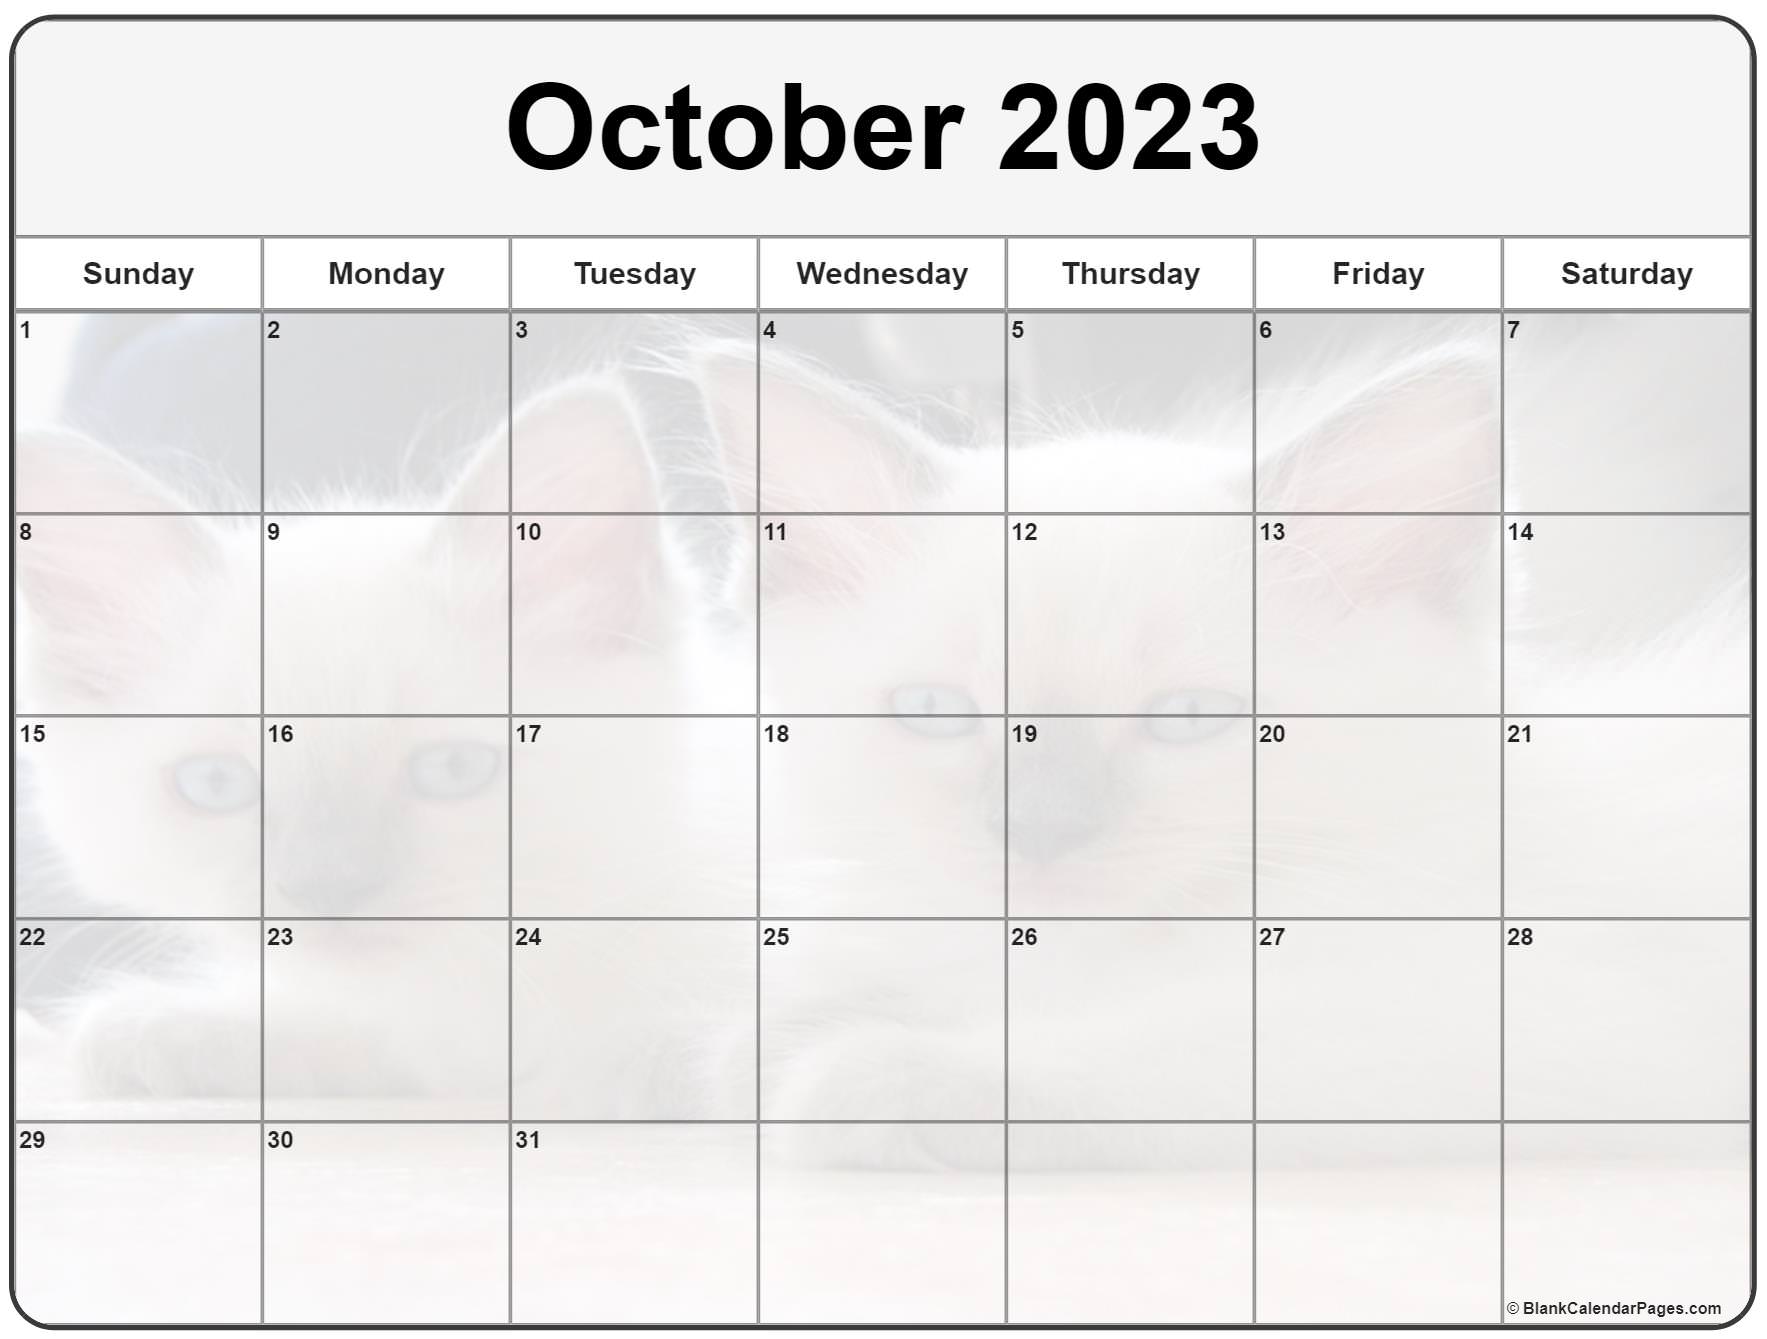 October 2023 Calendar Of The Month Free Printable October 2023 